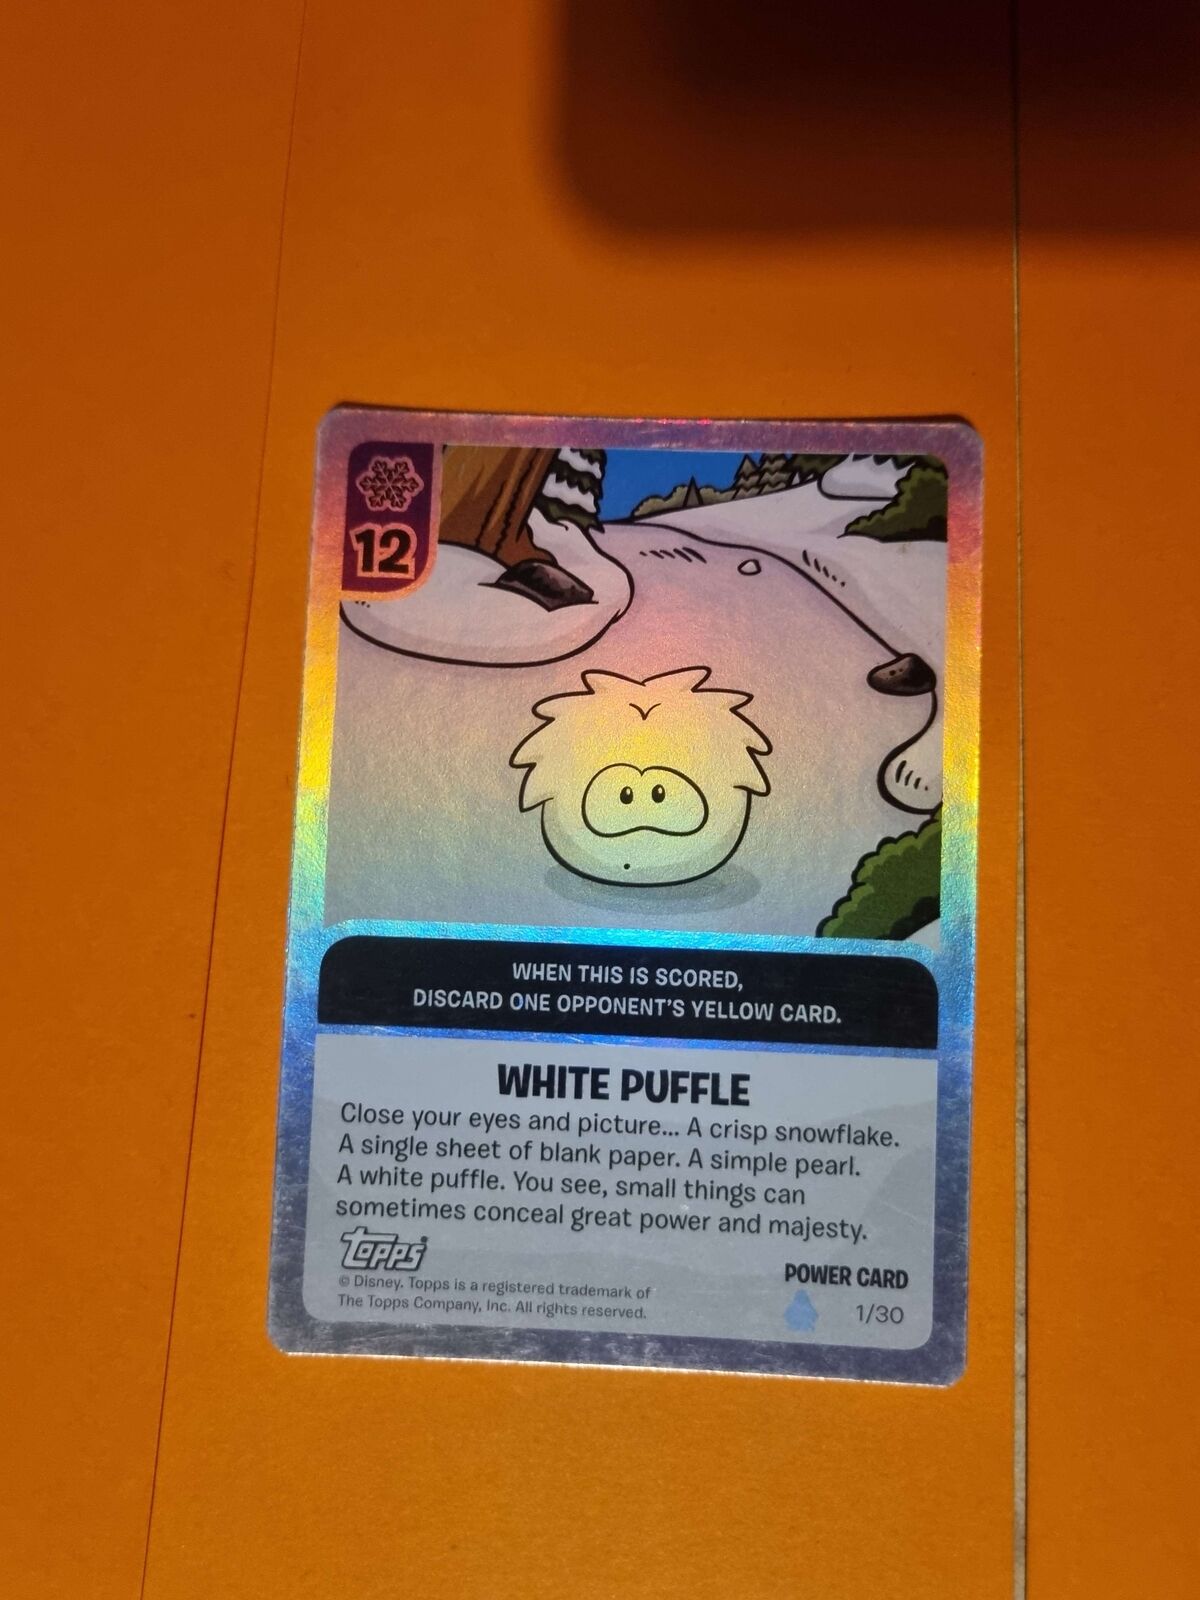 Club Penguin Card Jitsu Series 1 Set 2 Puffle Deck (Out of 30) Pick Your Card(s)